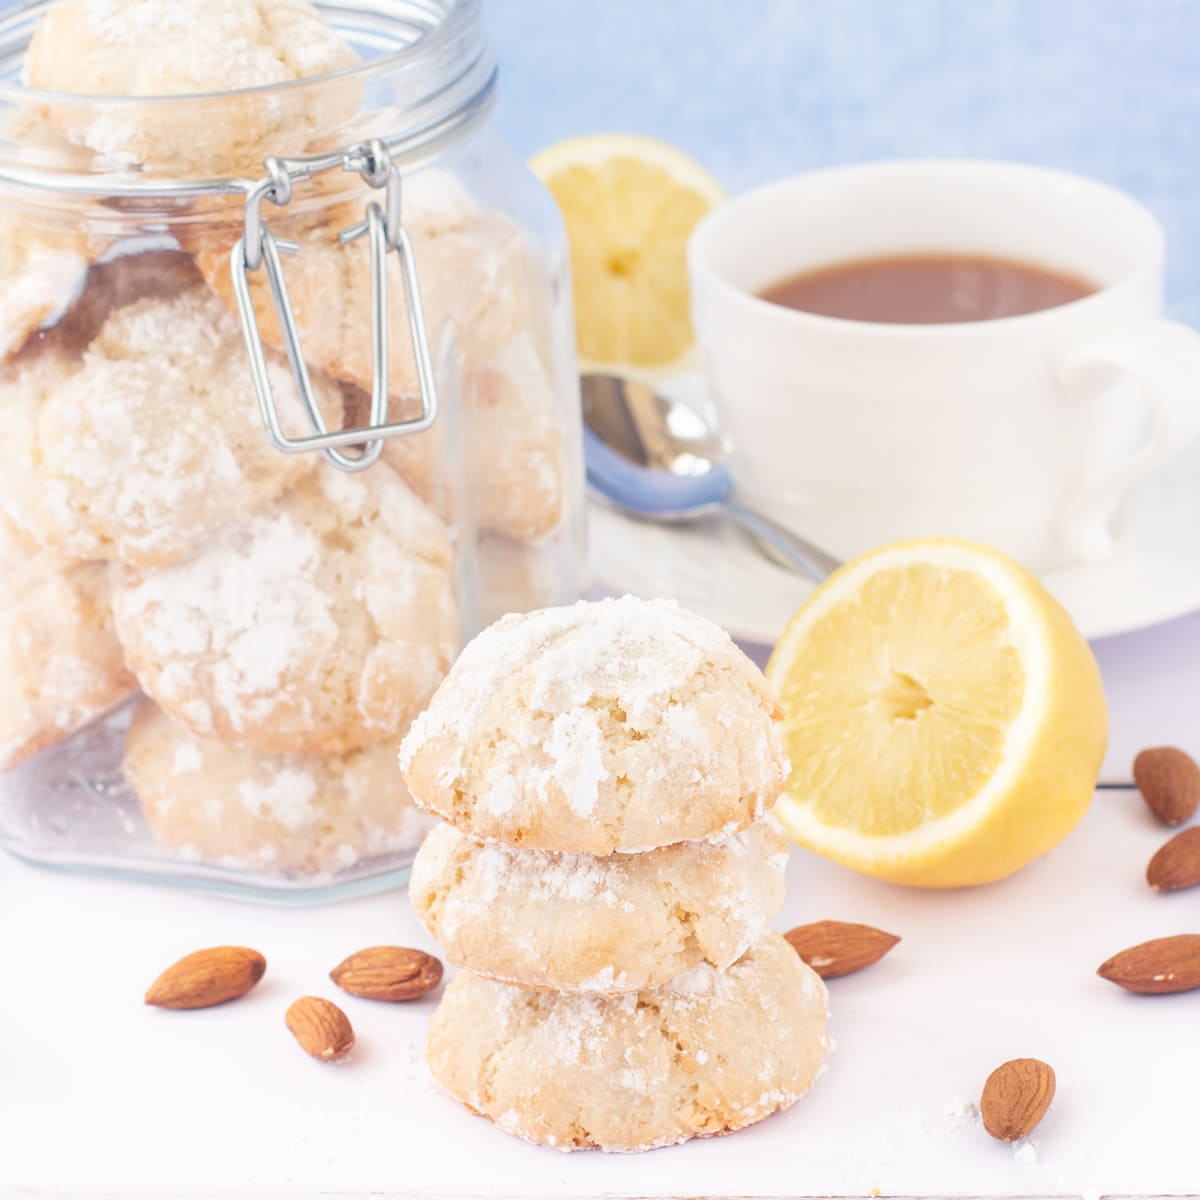 Delicious soft centred Lemon Amaretti Biscuits. So easy to make, crisp on the outside, chewy in the middle and packed with lemon flavour. They’re naturally gluten-free too.